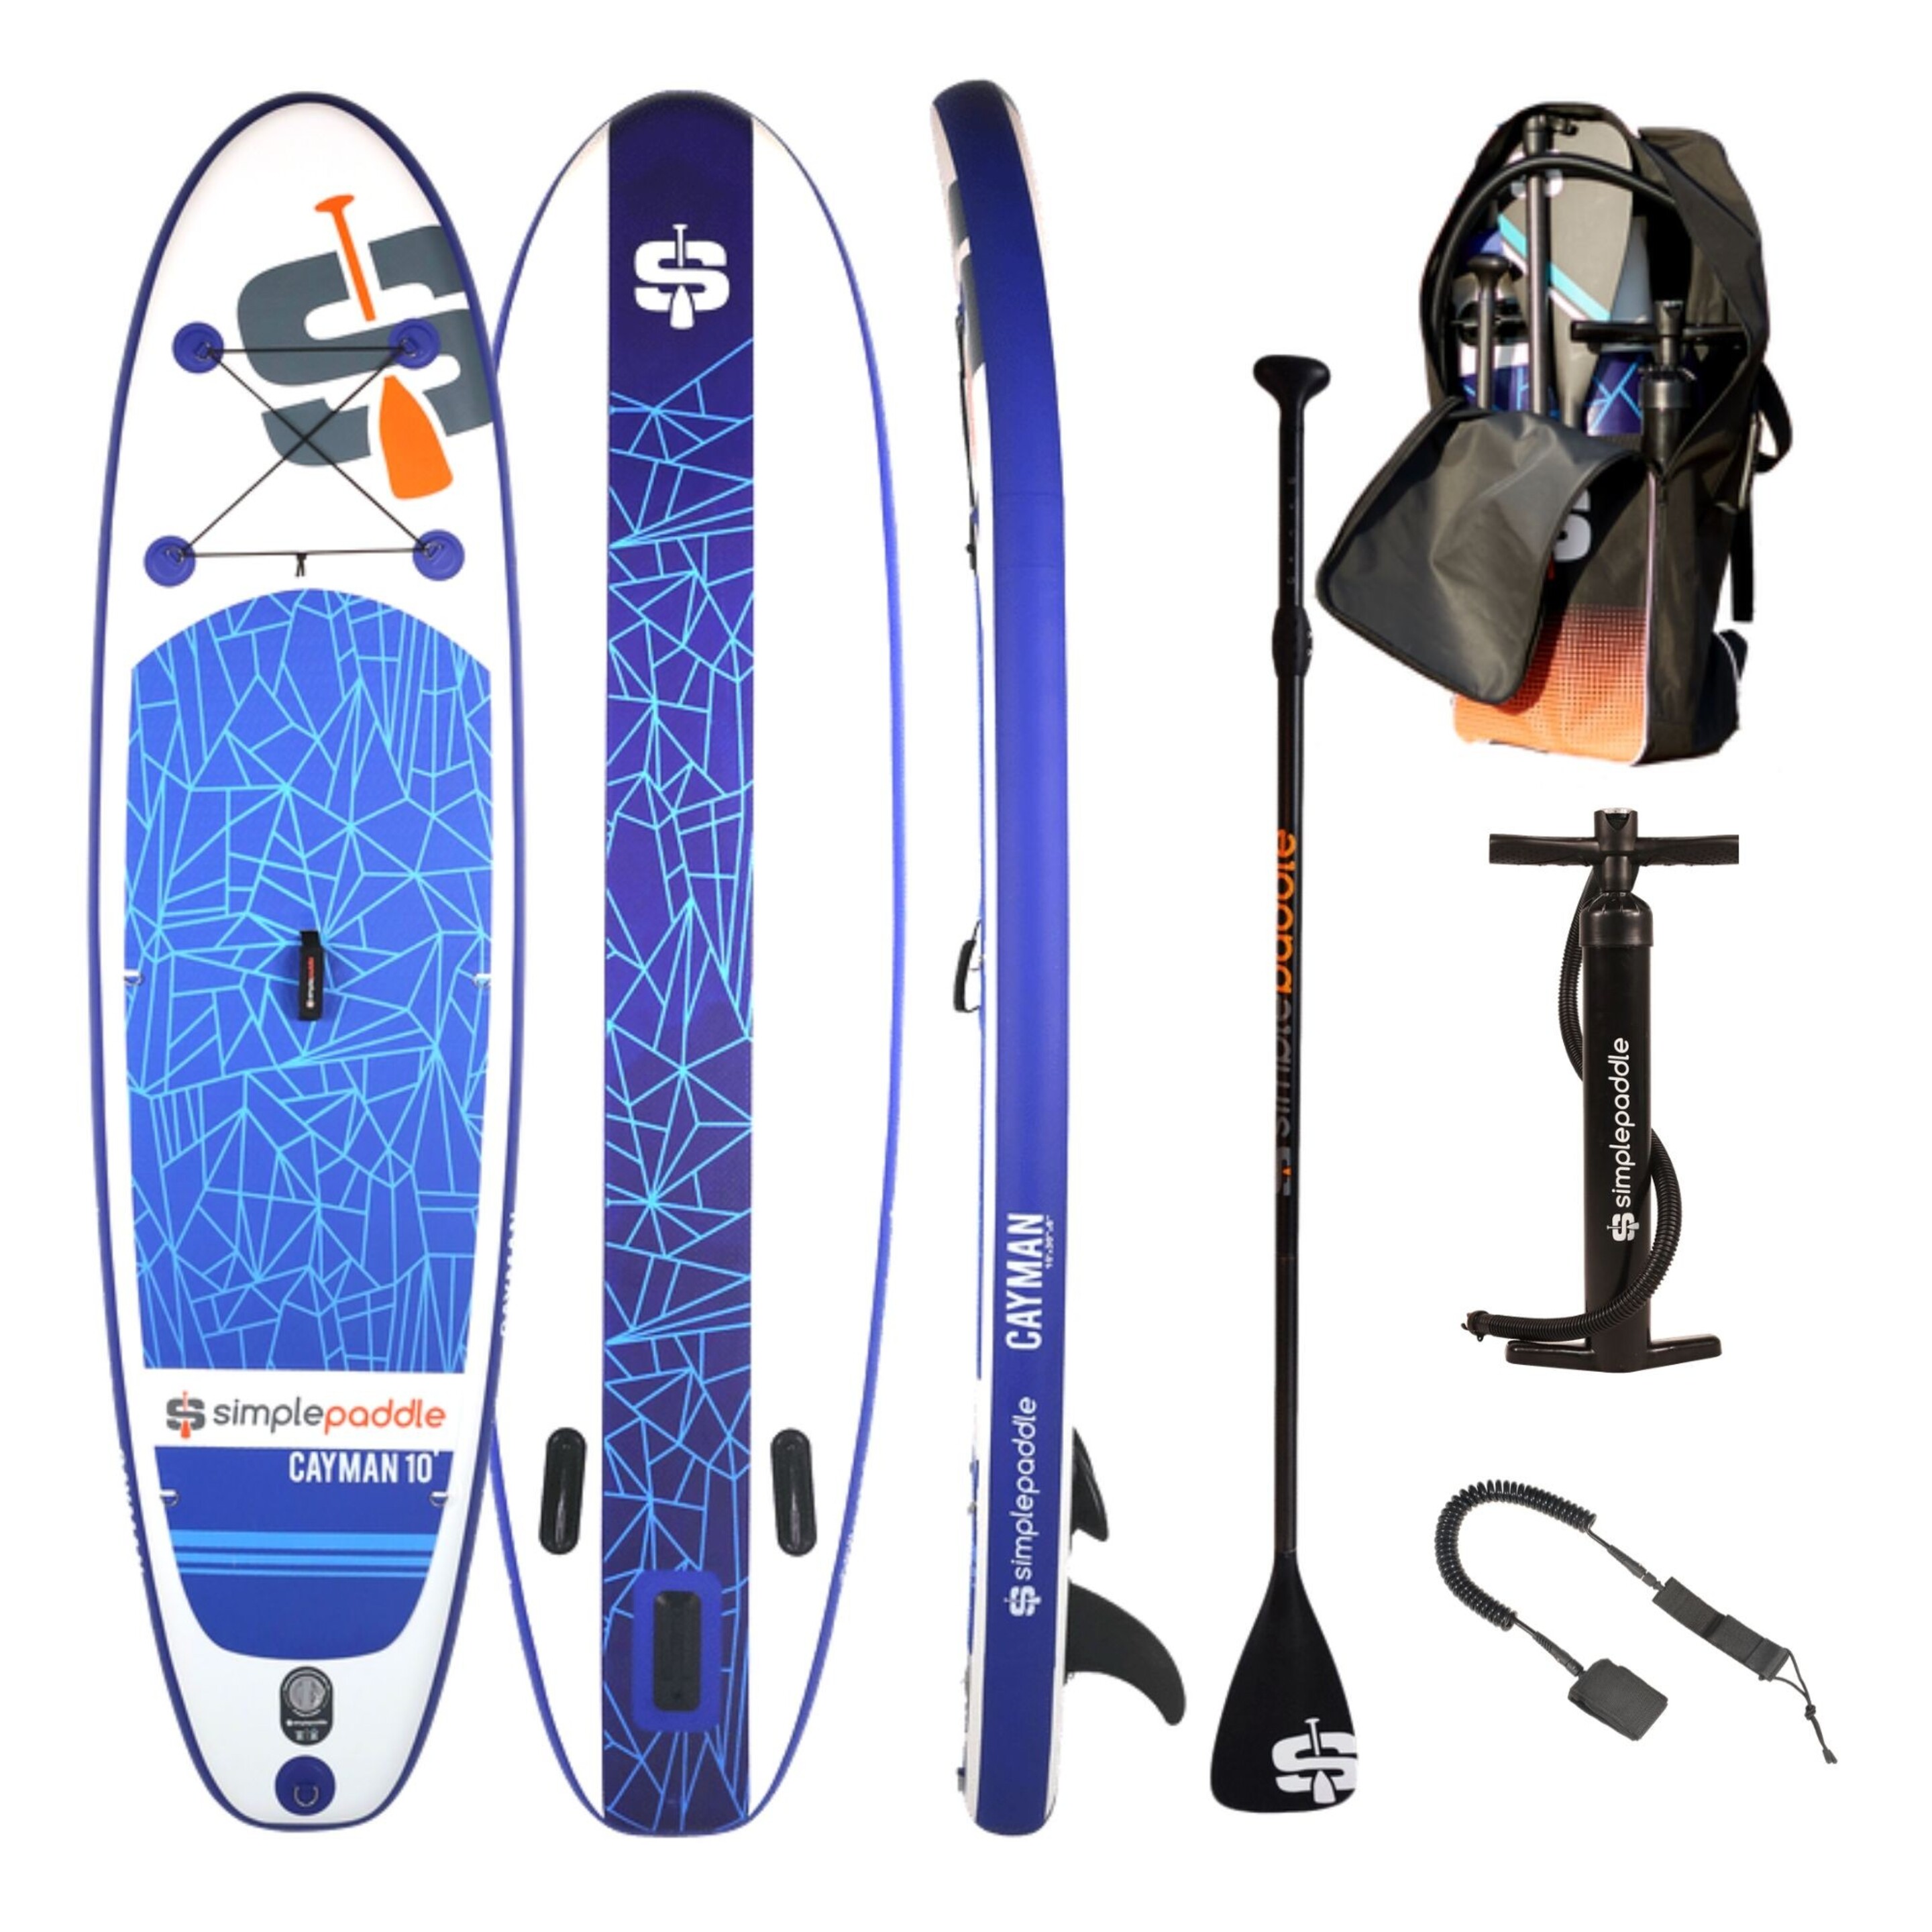 Paddle Hinchable Cayman 10' + Accesorios